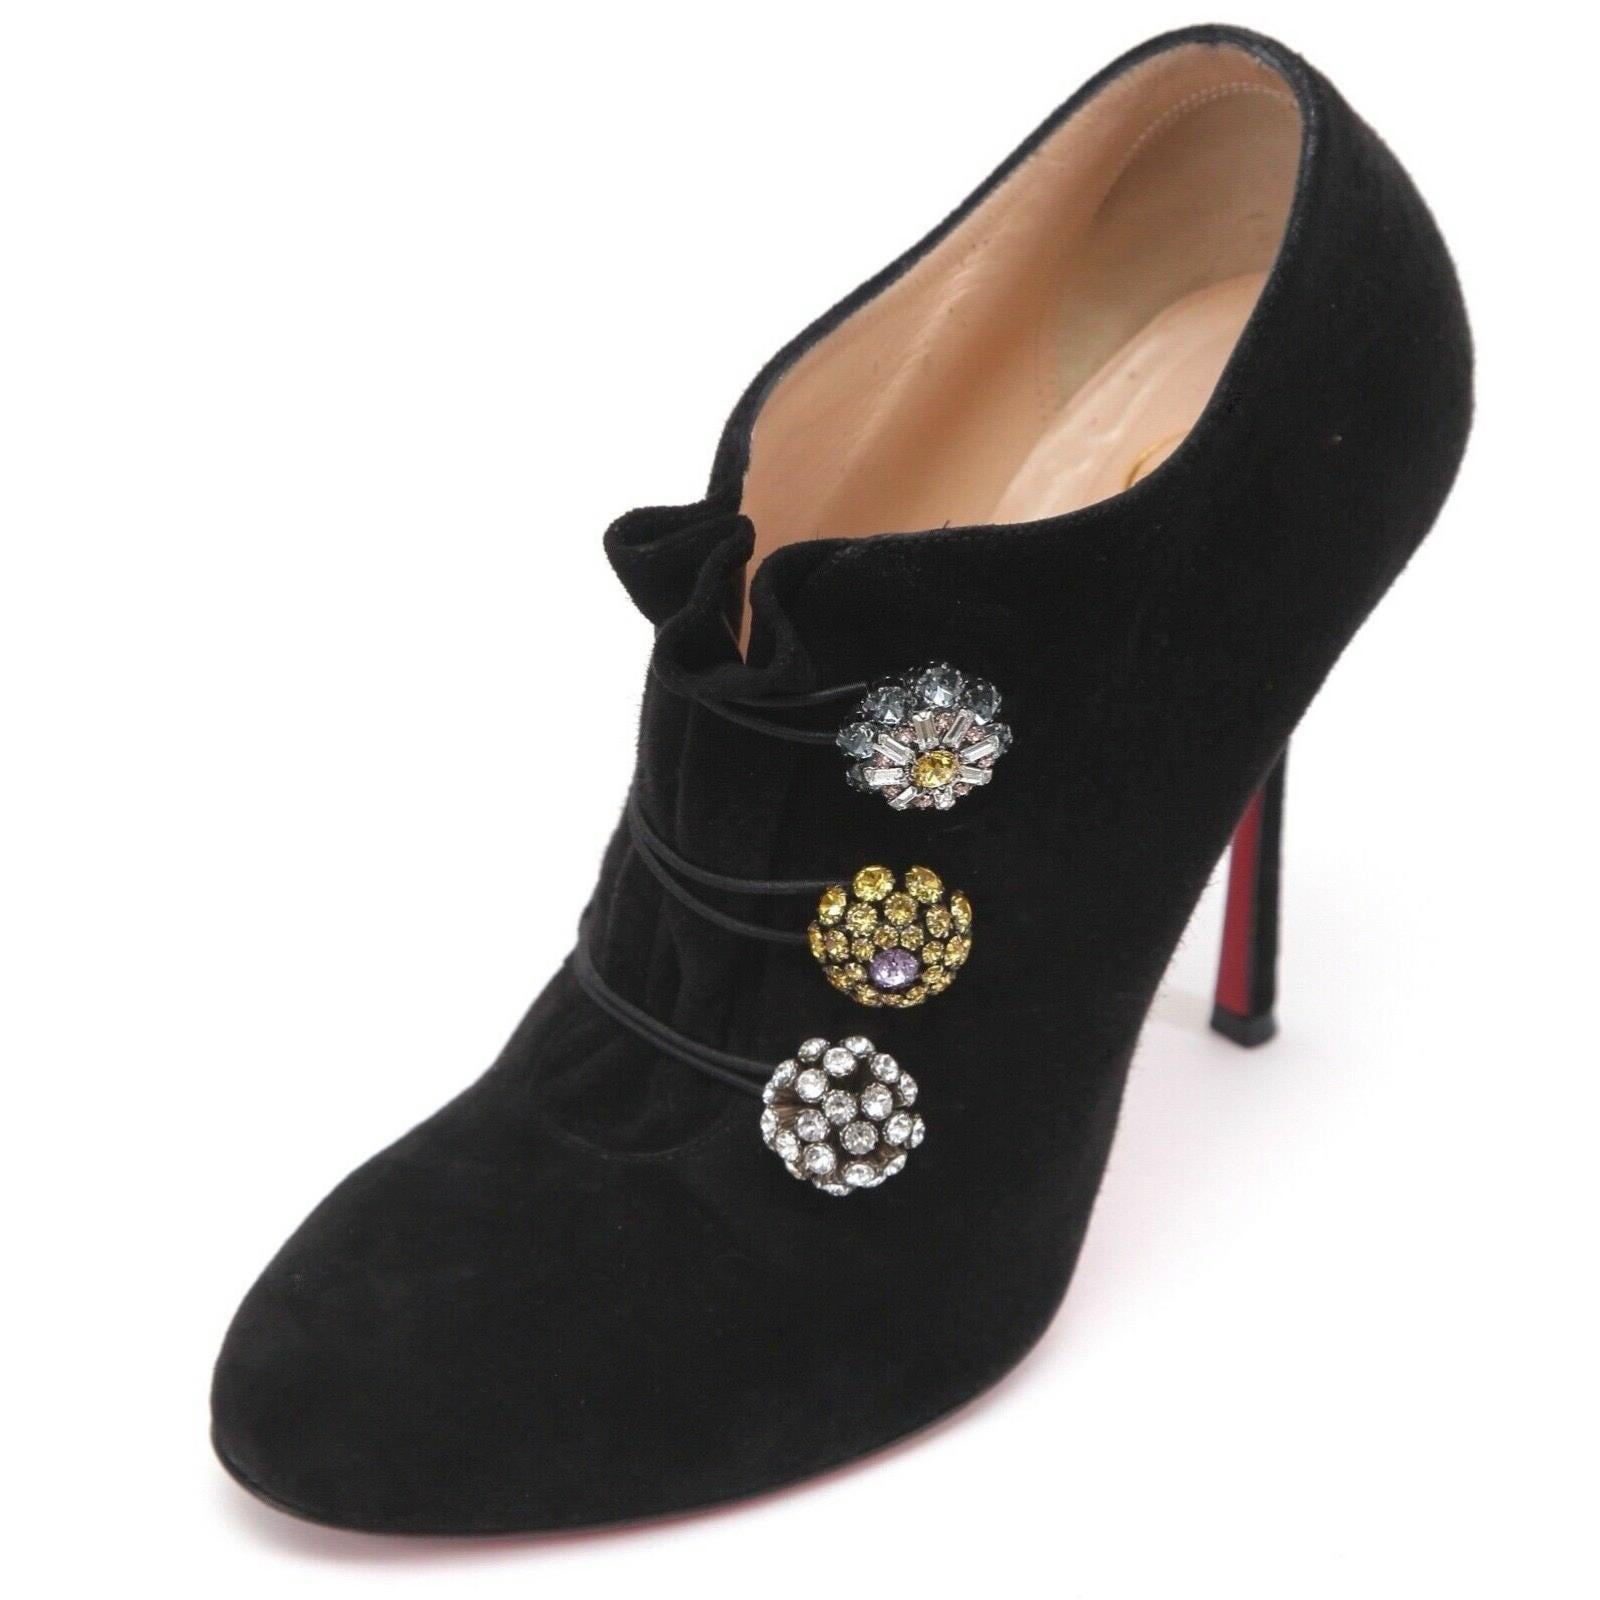 GUARANTEED AUTHENTIC CHRISTIAN LOUBOUTIN BLACK SUEDE BOOTONI MJ 100 ANKLE BOOT

Retail excluding sales taxes approximately $1,245

Details:
- Black suede leather ankle boot.
- 3 crystal adornments over top of foot.
- Almond shaped toe.
- Slip on.
-